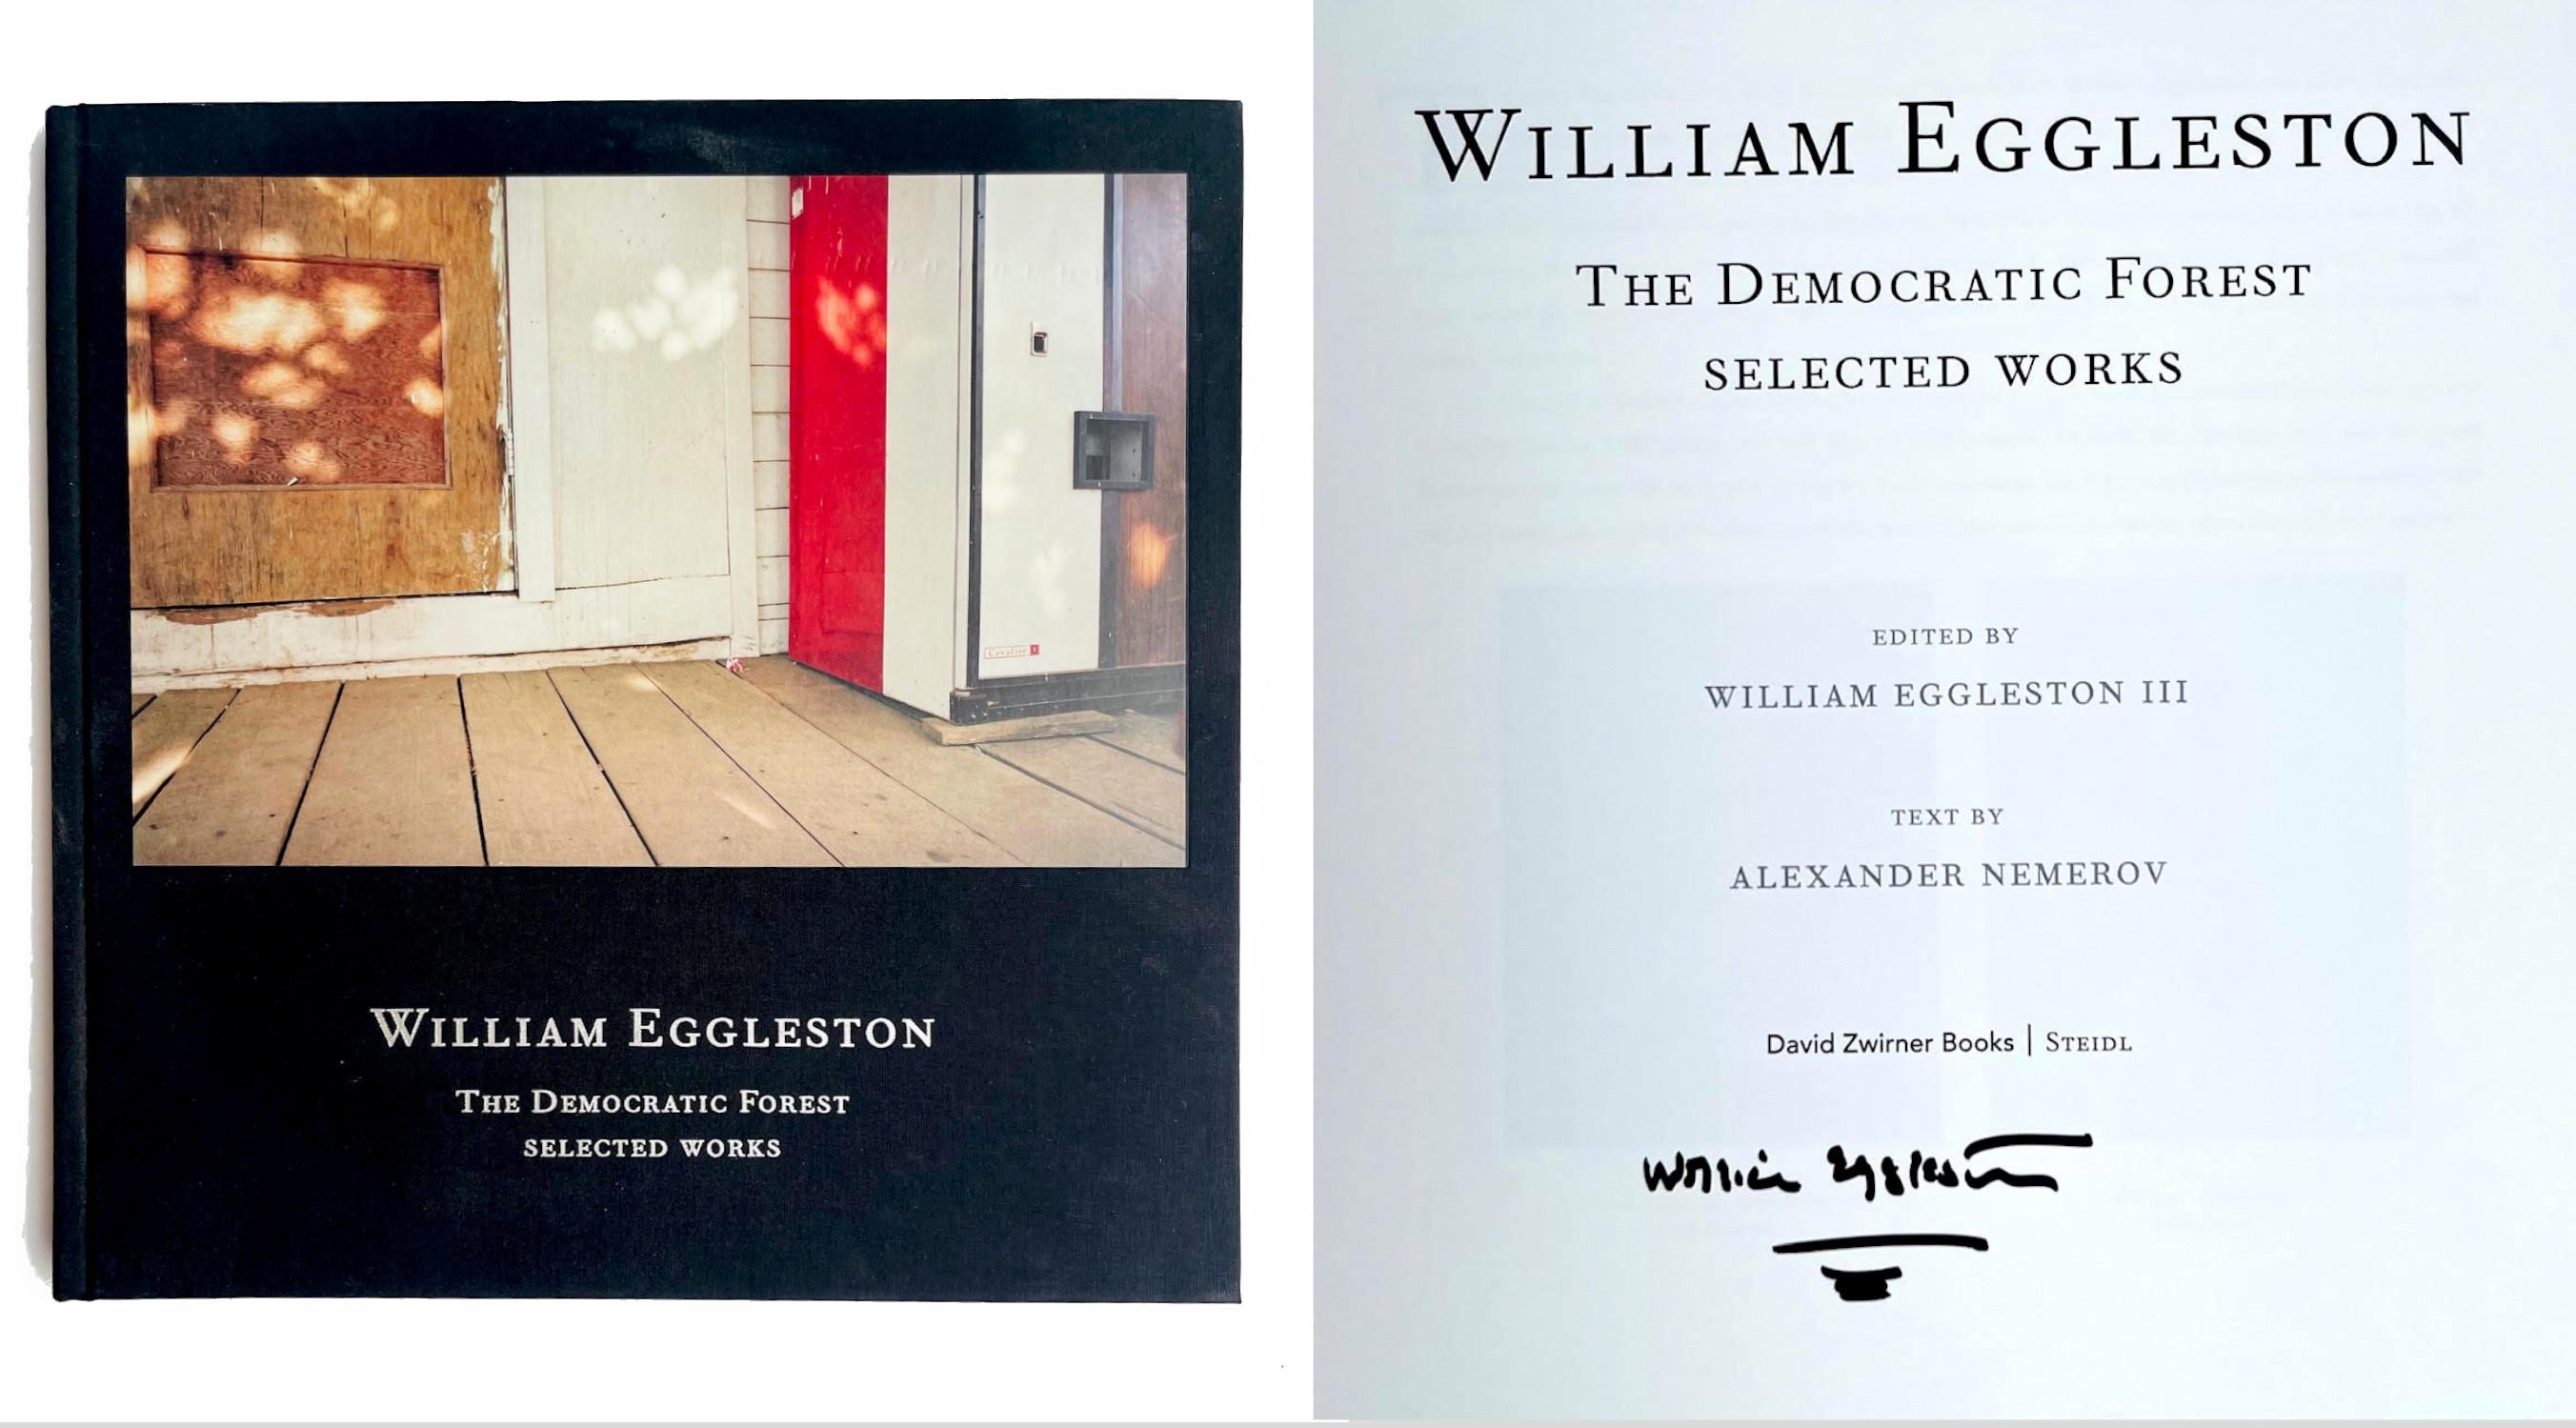 William Eggleston The Democratic Forest Selected Works (Hand signed)